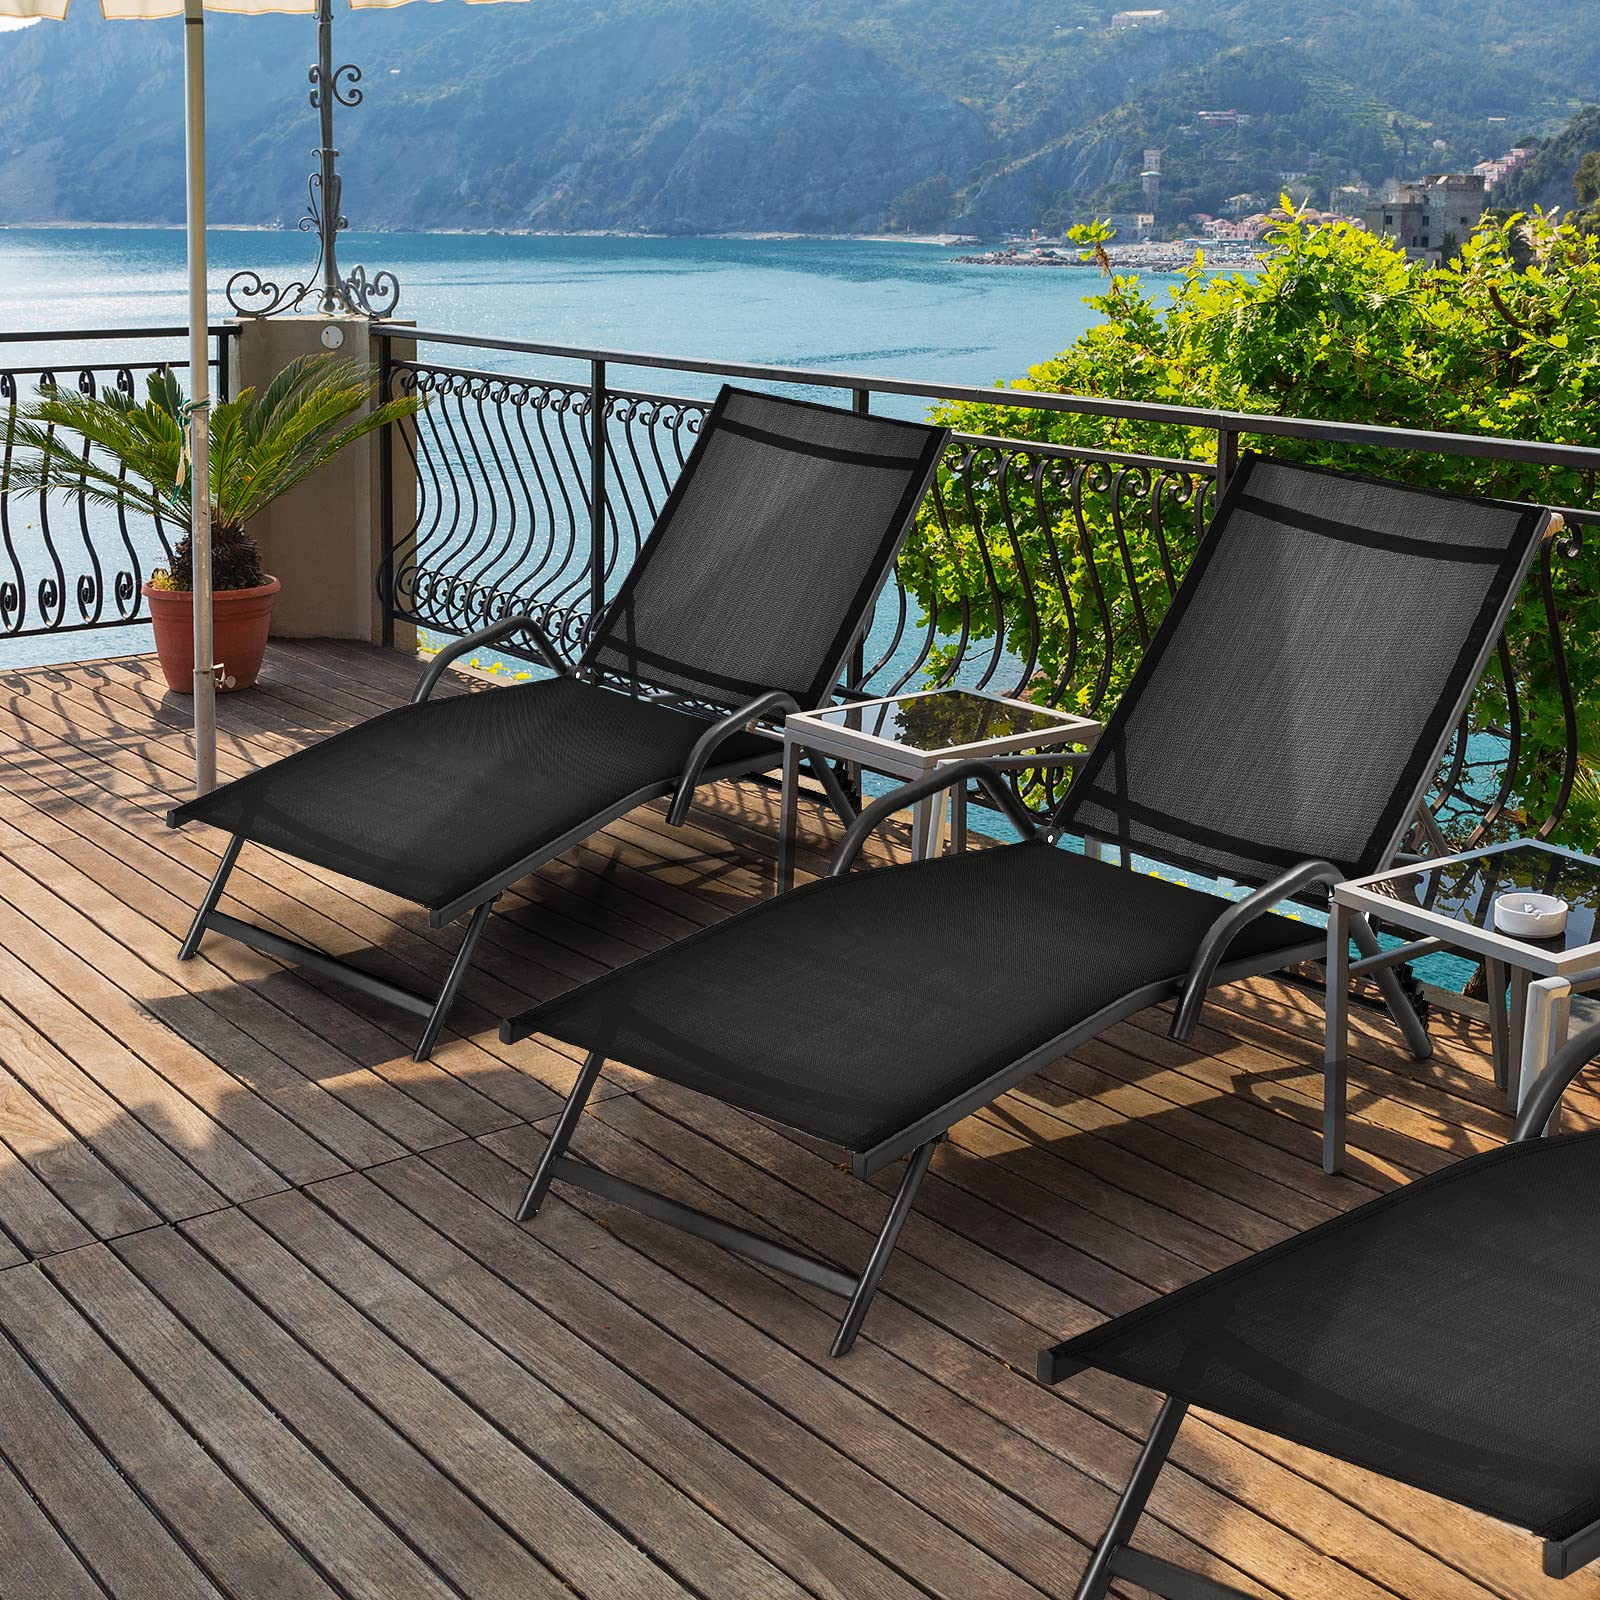 Giantex Lounge Chairs for Outside - Set of 2 Outdoor Chaise Lounge with 5 Adjustable Position